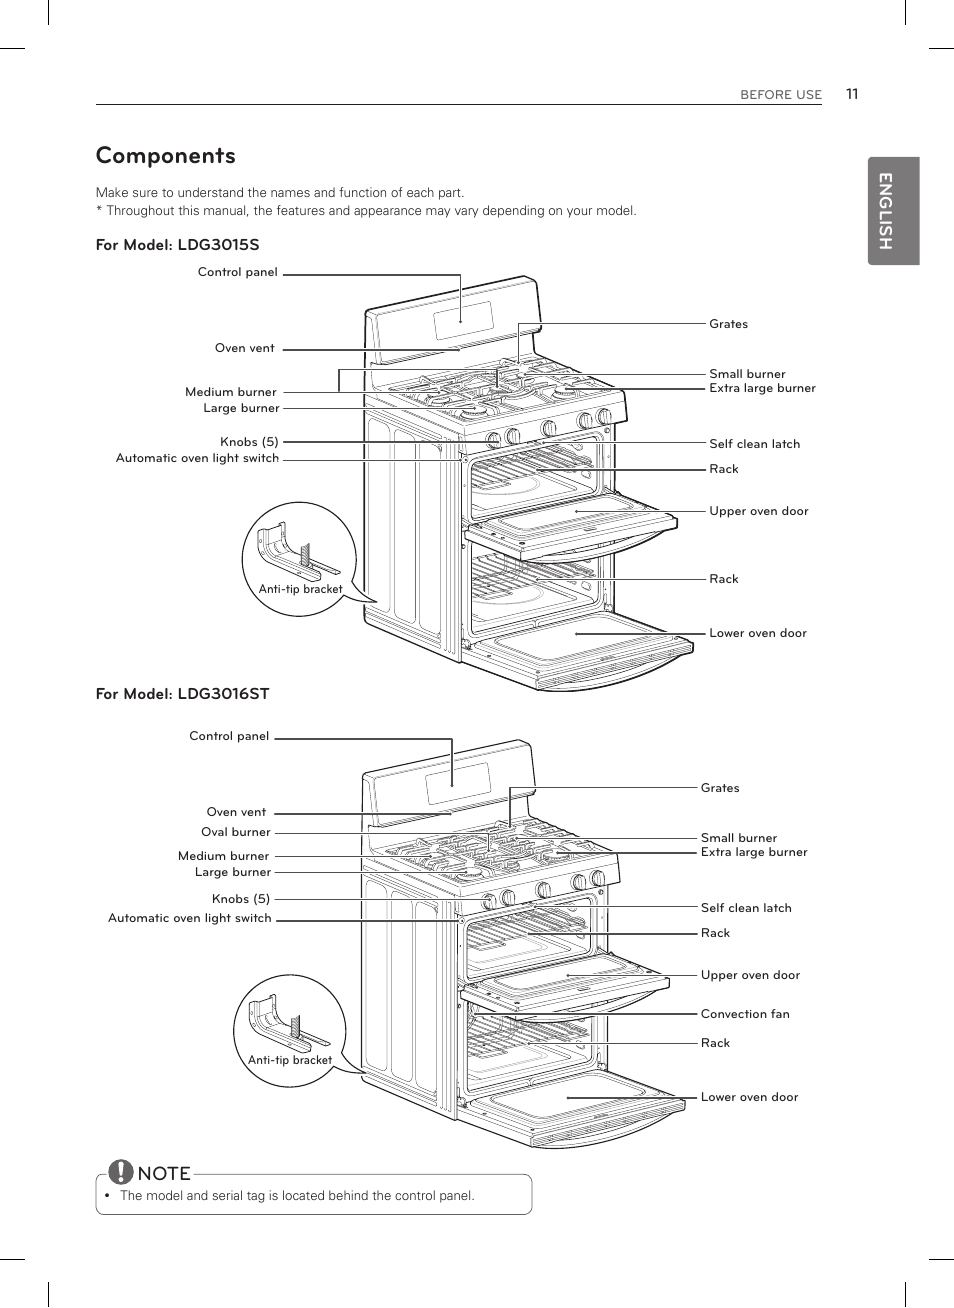 Components, English | LG LDG3015SW User Manual | Page 12 / 93